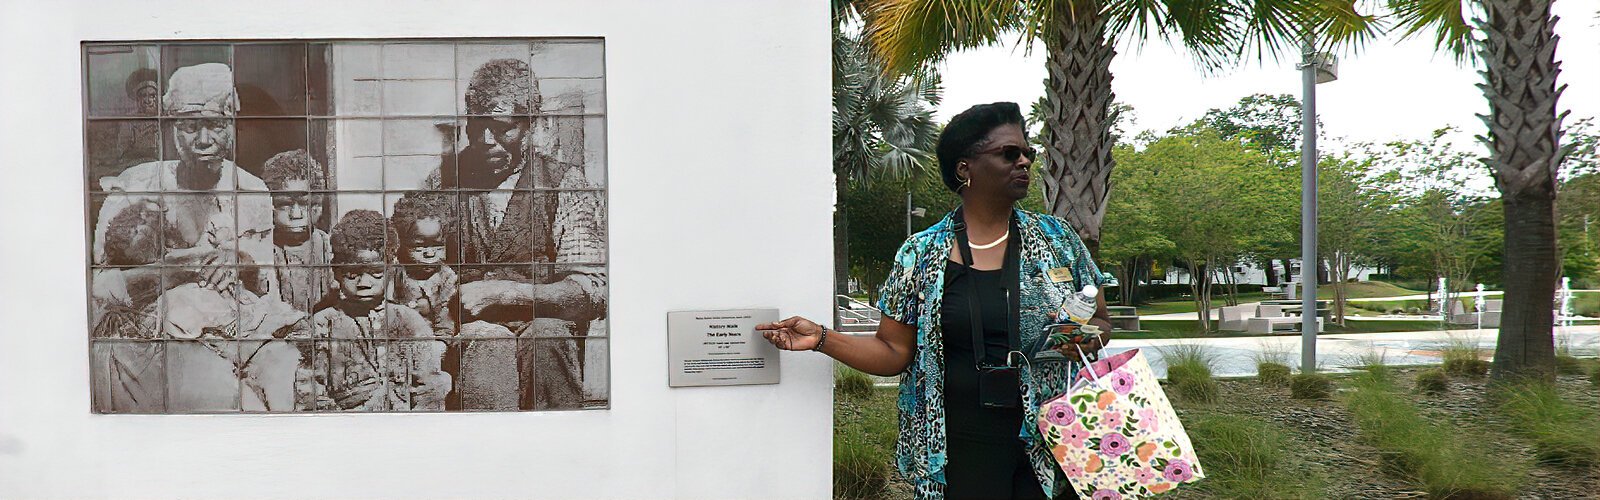 Tour guide Ersula Odom relates the Early Years of The Scrub with the LIFETILES of Rufus Butler Seder who used hand cast optical tiles and historic photographs to create his artwork.